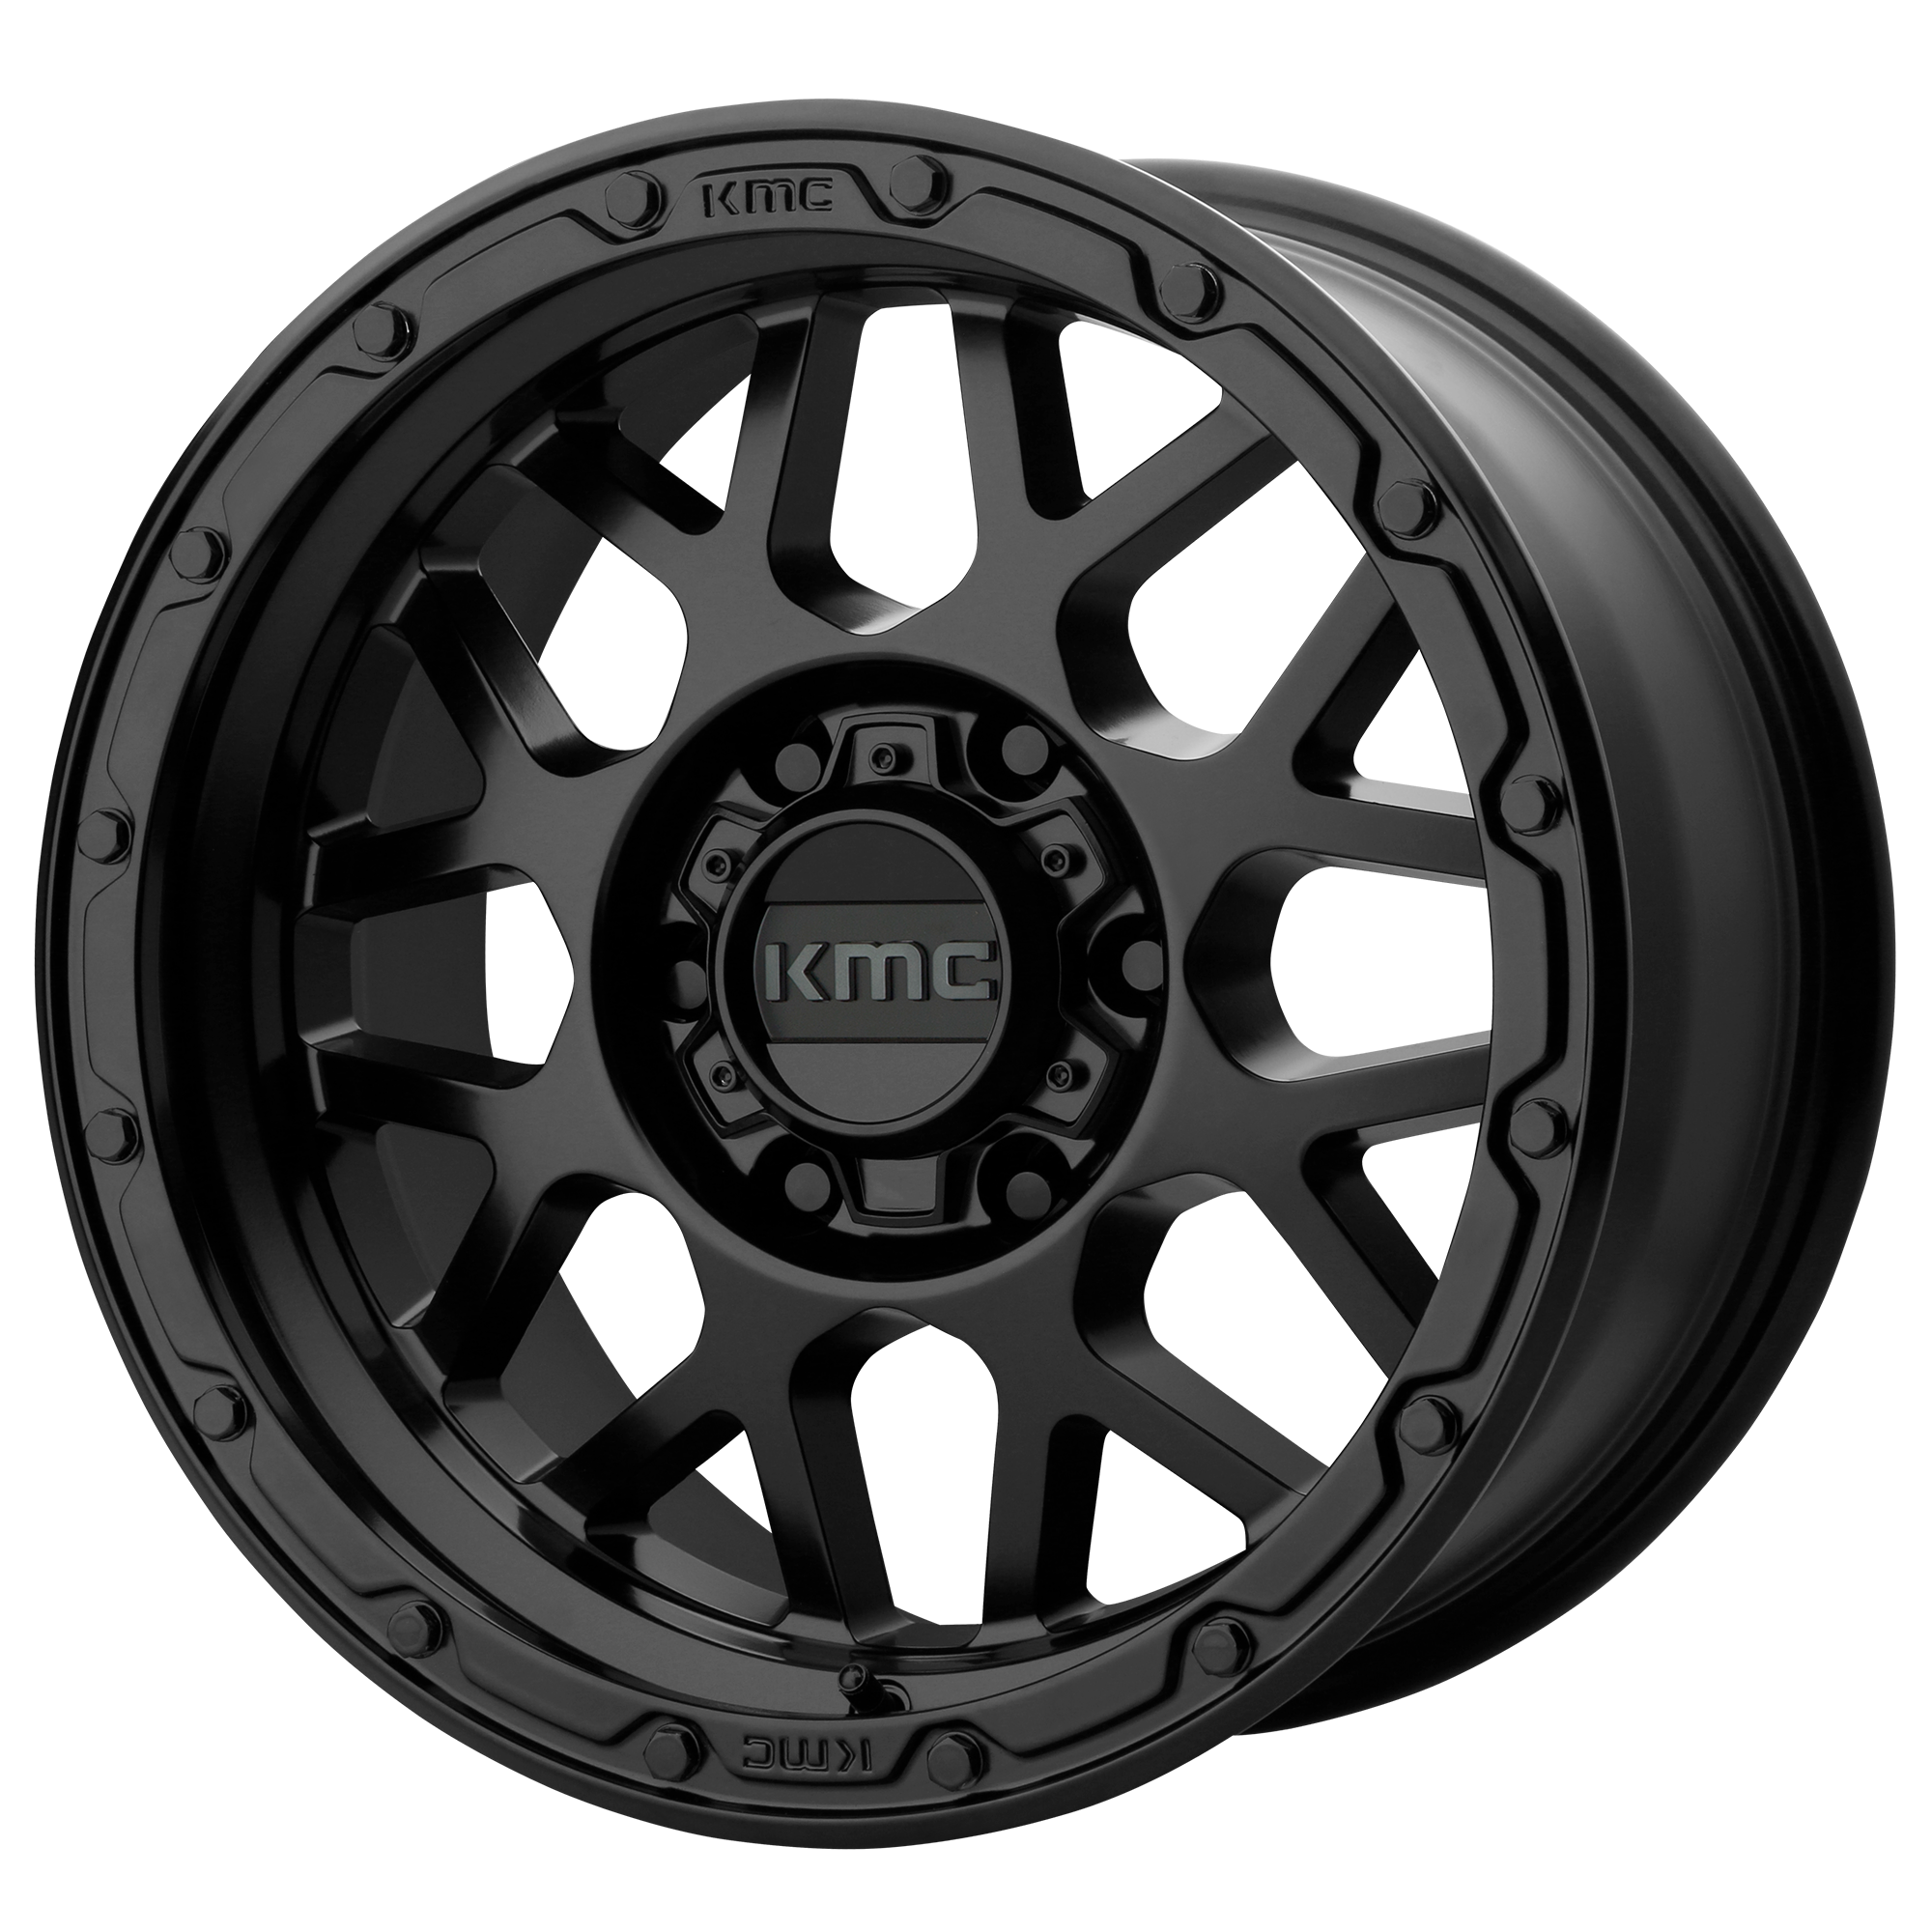 GRENADE OFF-ROAD 17x8.5 5x139.70 MATTE BLACK (0 mm) - Tires and Engine Performance